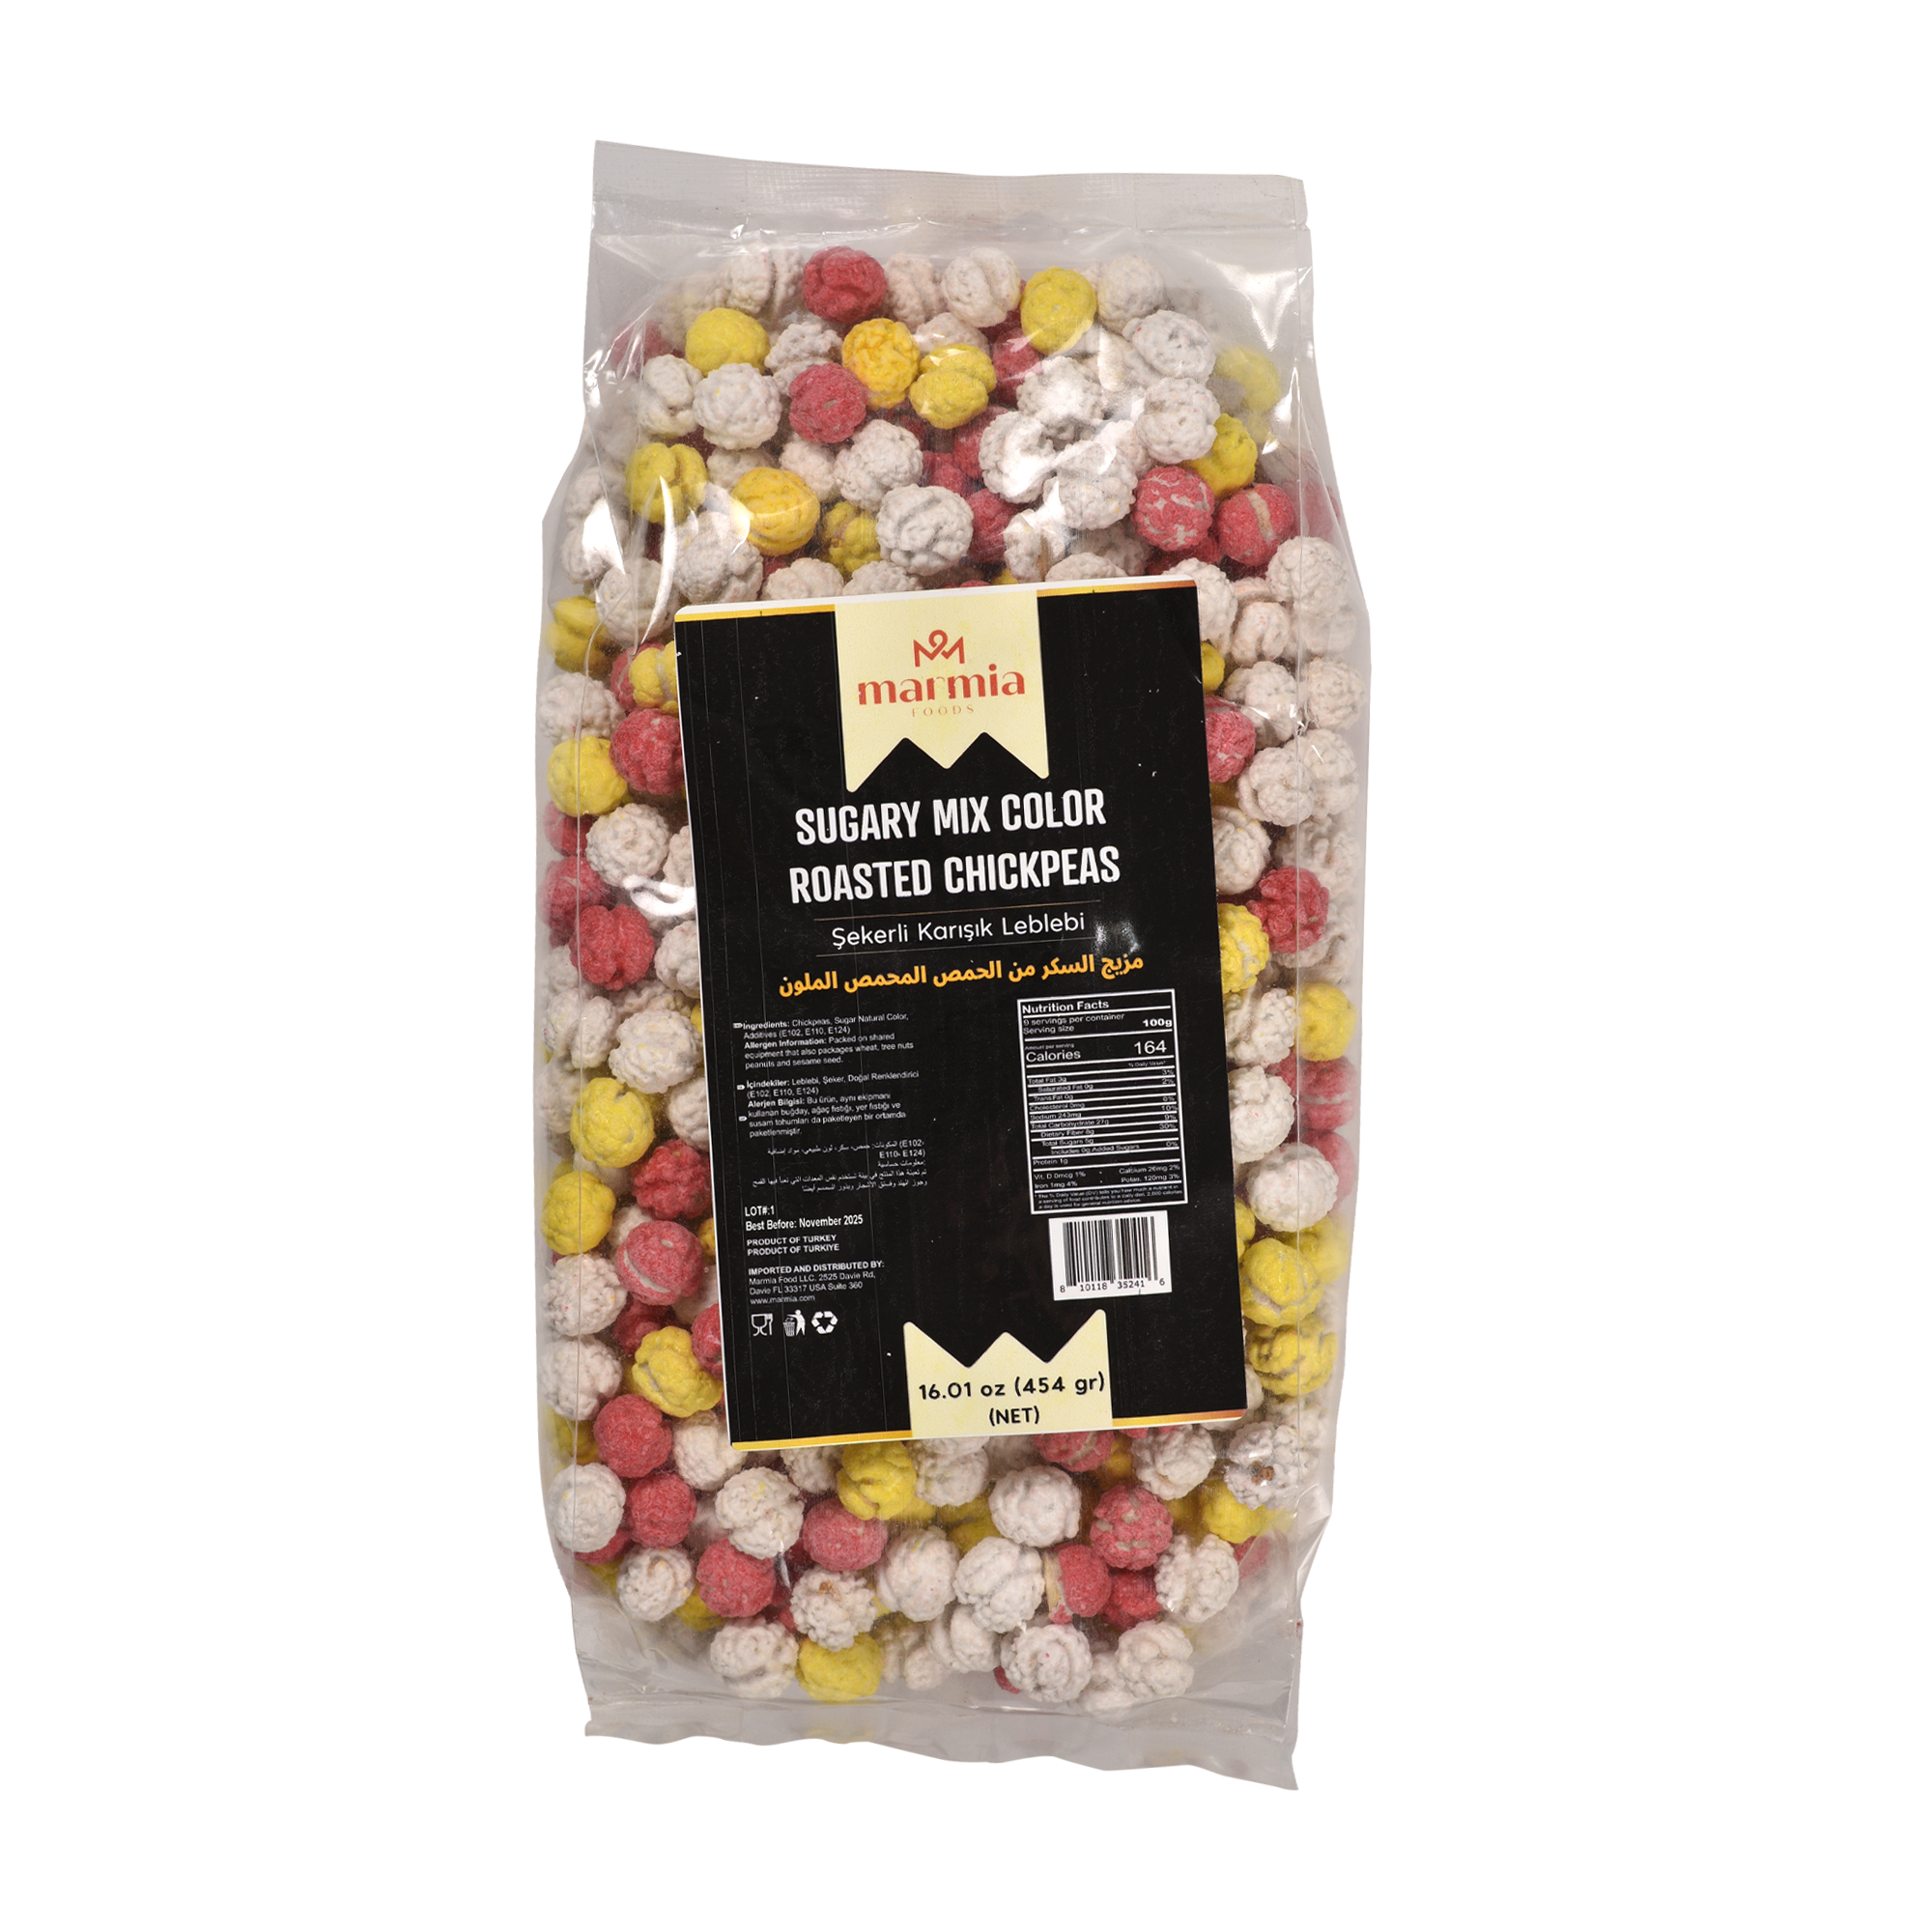 Sugary Mix Color Roasted Chickpeas 454 g